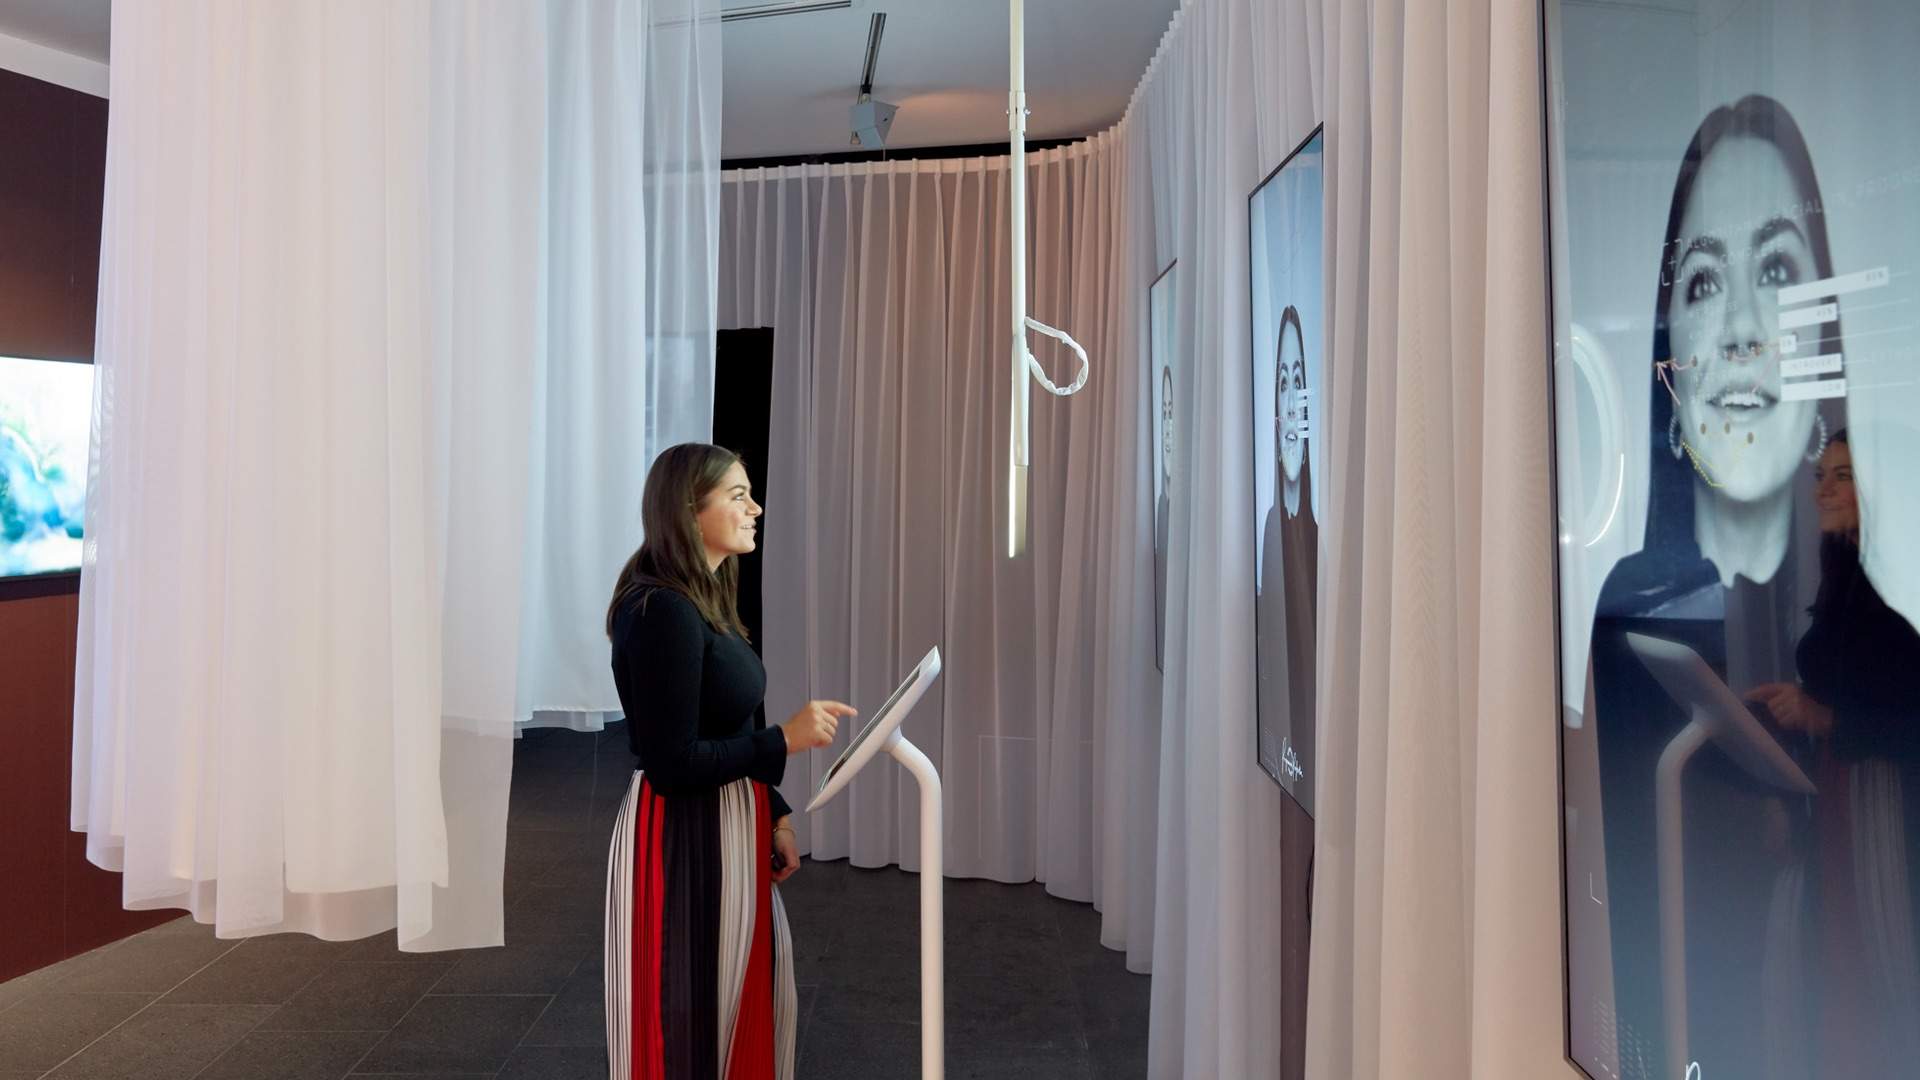 The NGV's Futuristic New Exhibition Explores the Human Body Through High-Tech Installations